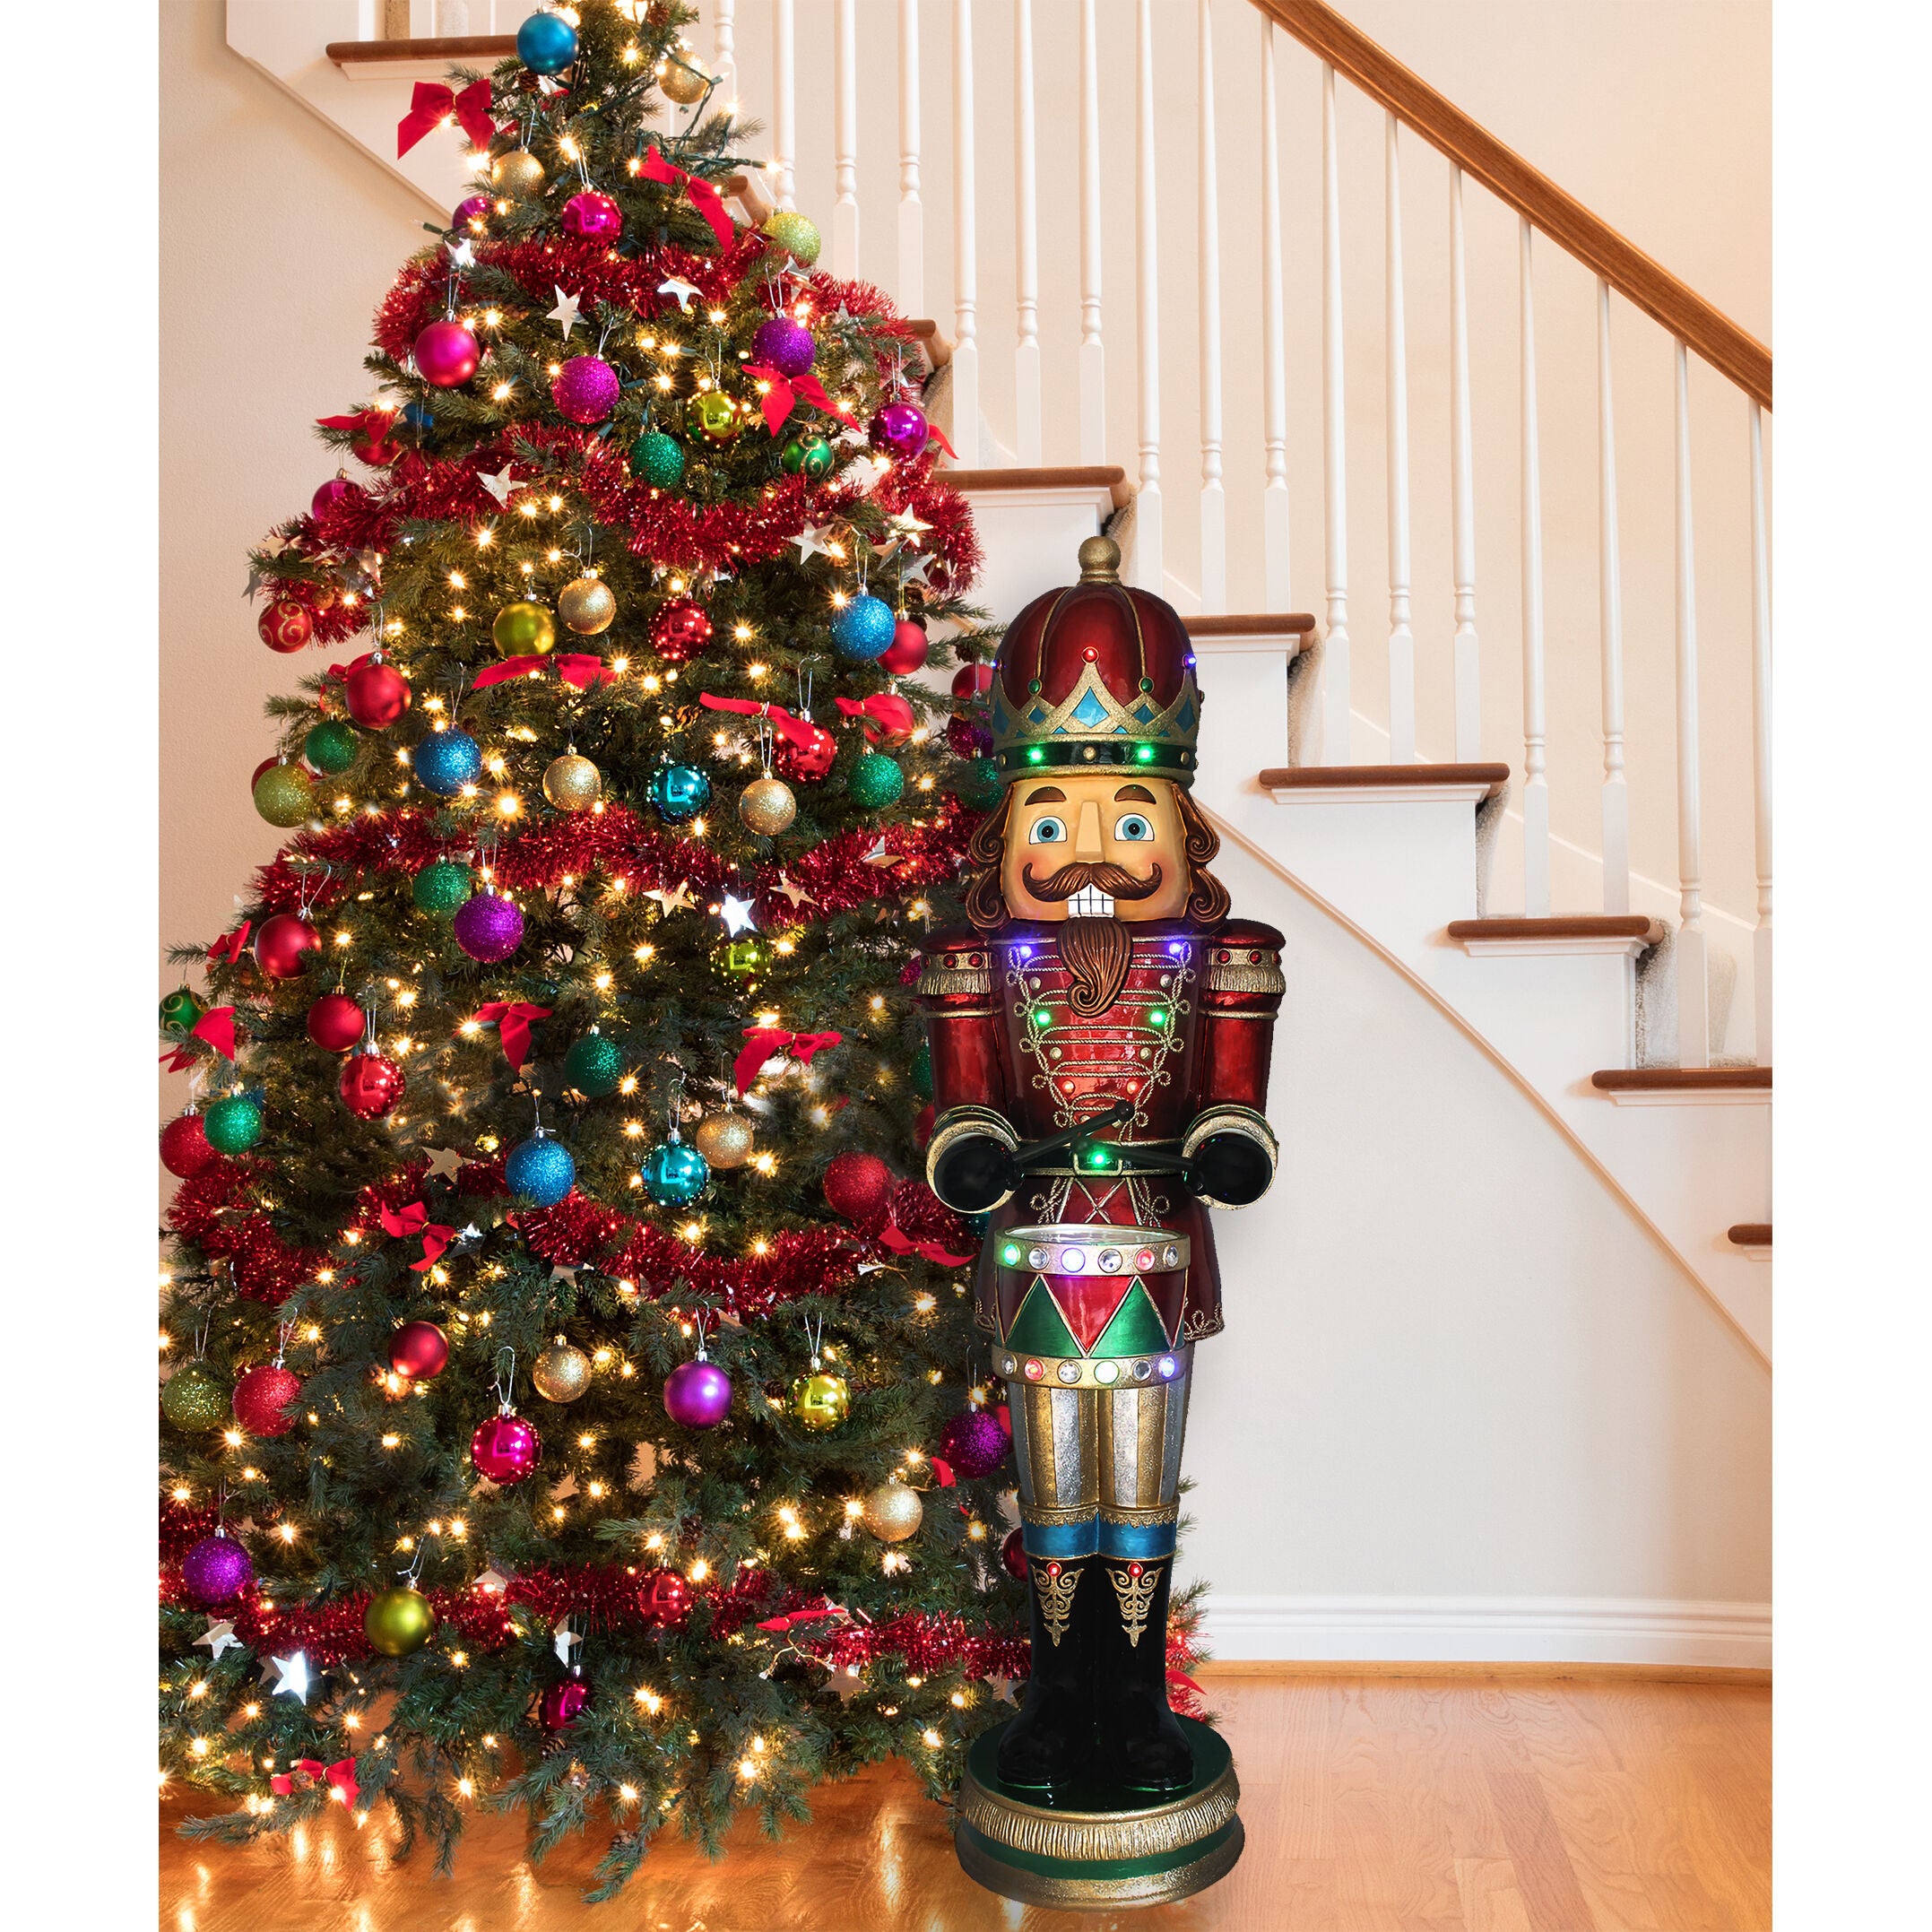 Fraser Hill Farm -  Indoor/Outdoor Oversized Christmas Decor, 61-In. Nutcracker Playing Snare Drum w/Moving Hands, Music, Timer, 20 LED Lights